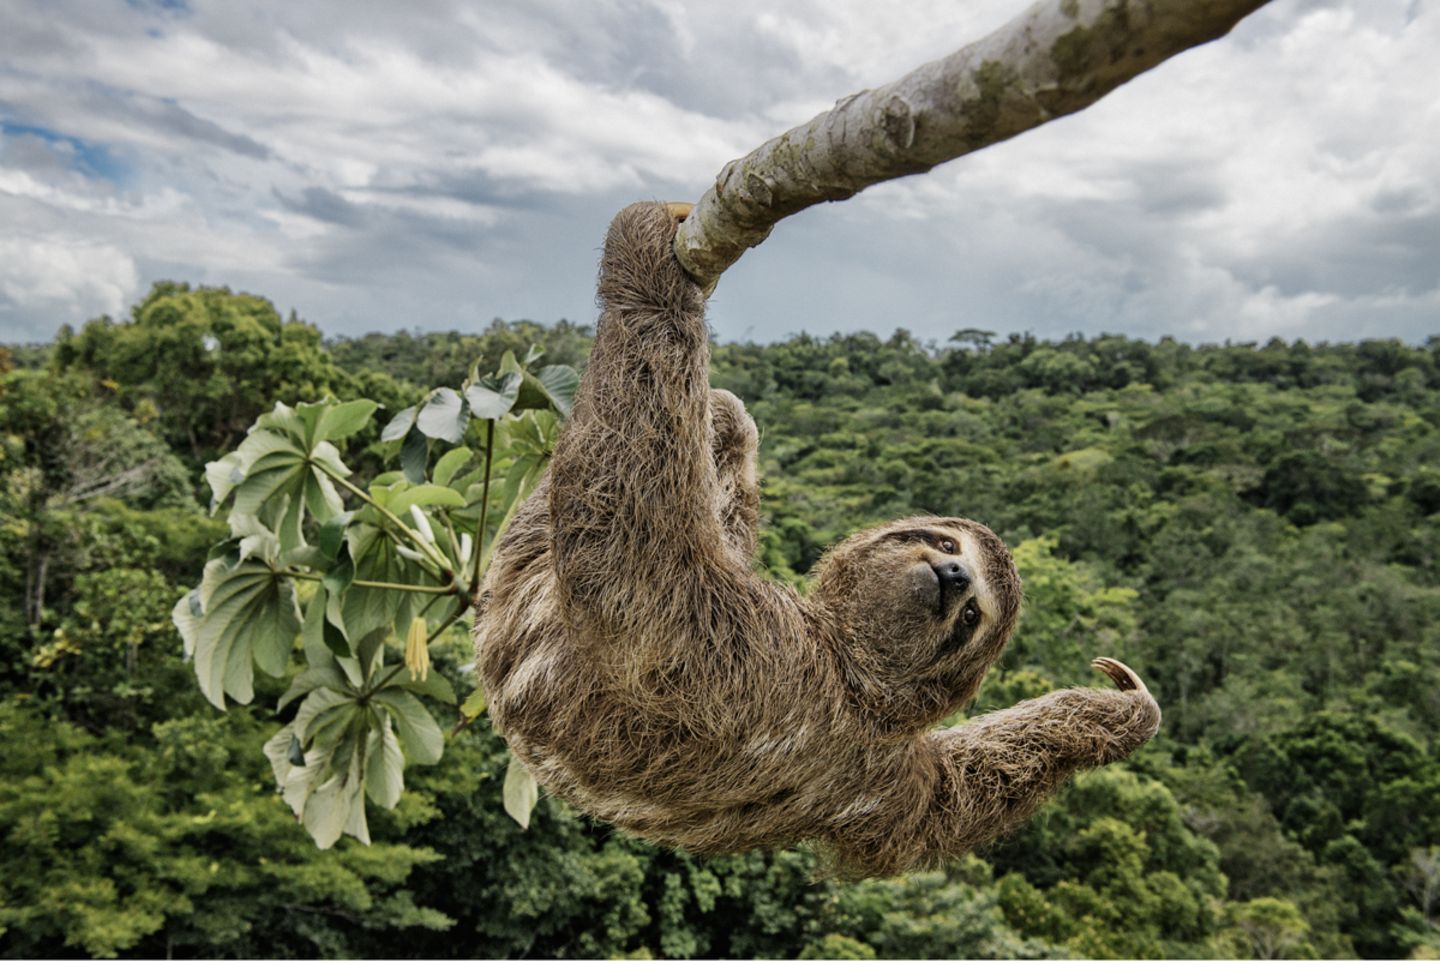 Luciano Candisani/Wildlife Photographer of the Year